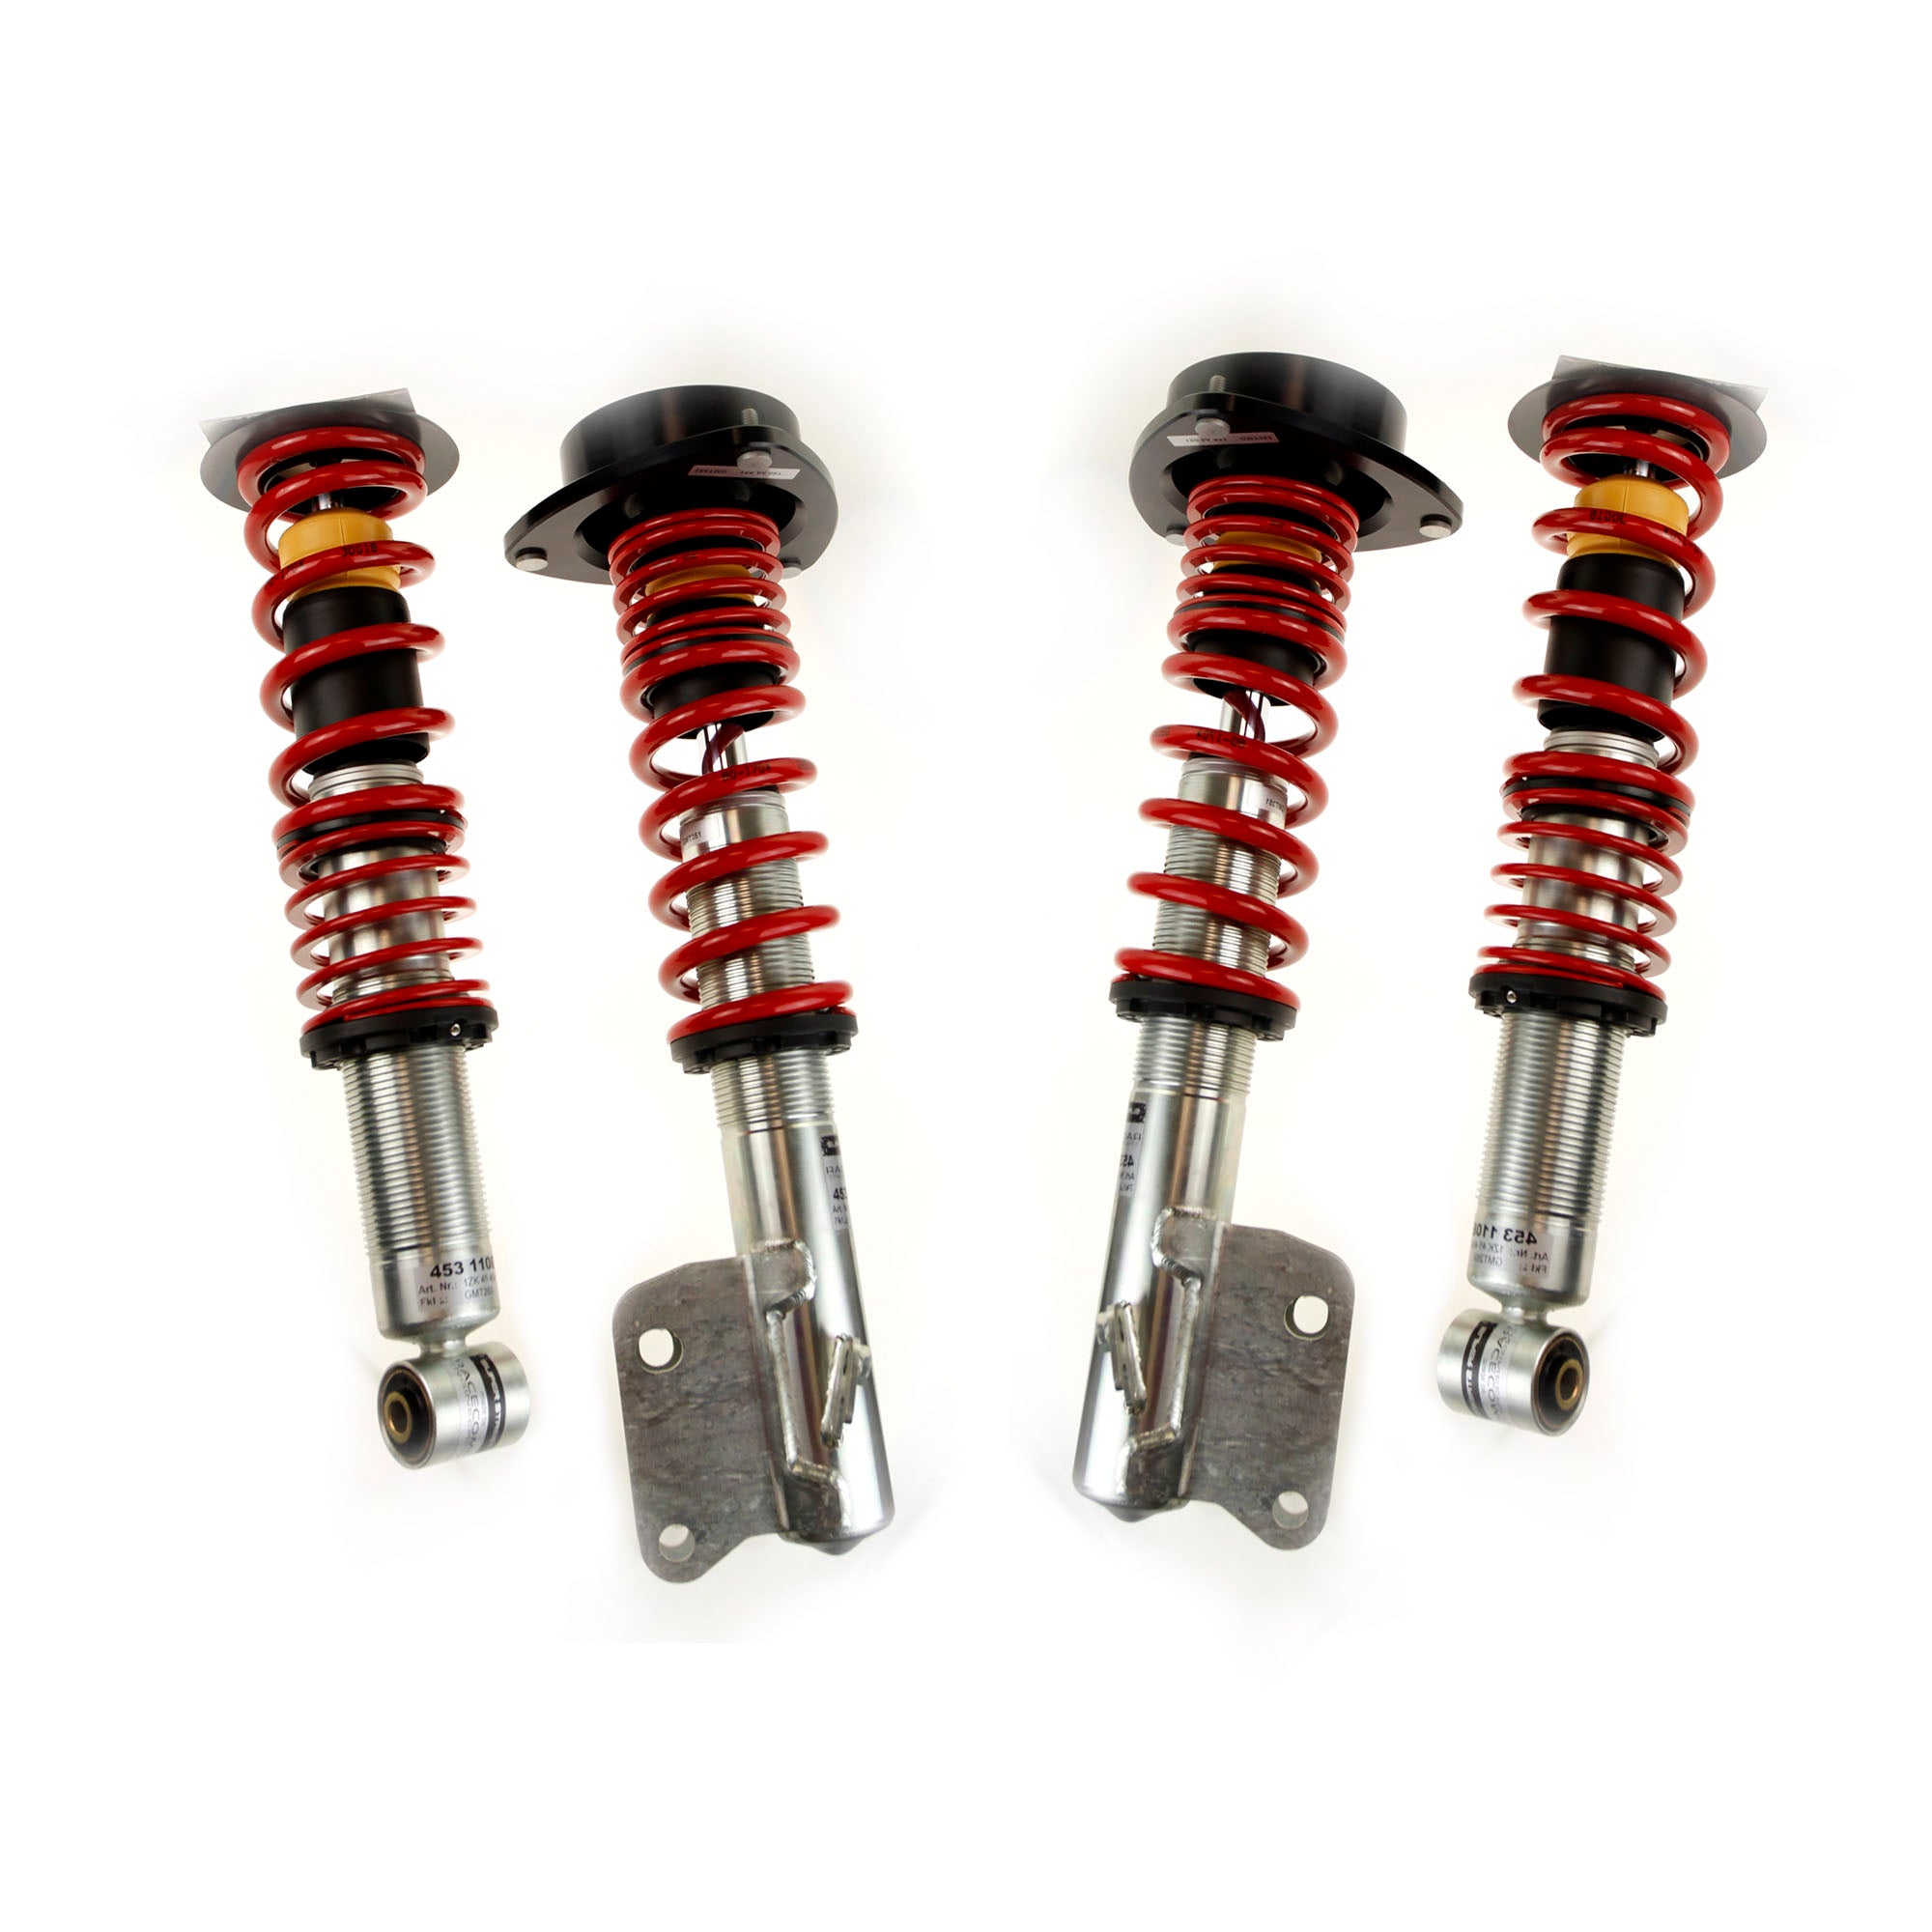 Racecomp Engineering Superstreet-1 Coilovers 2002-2007 WRX/2004 STI